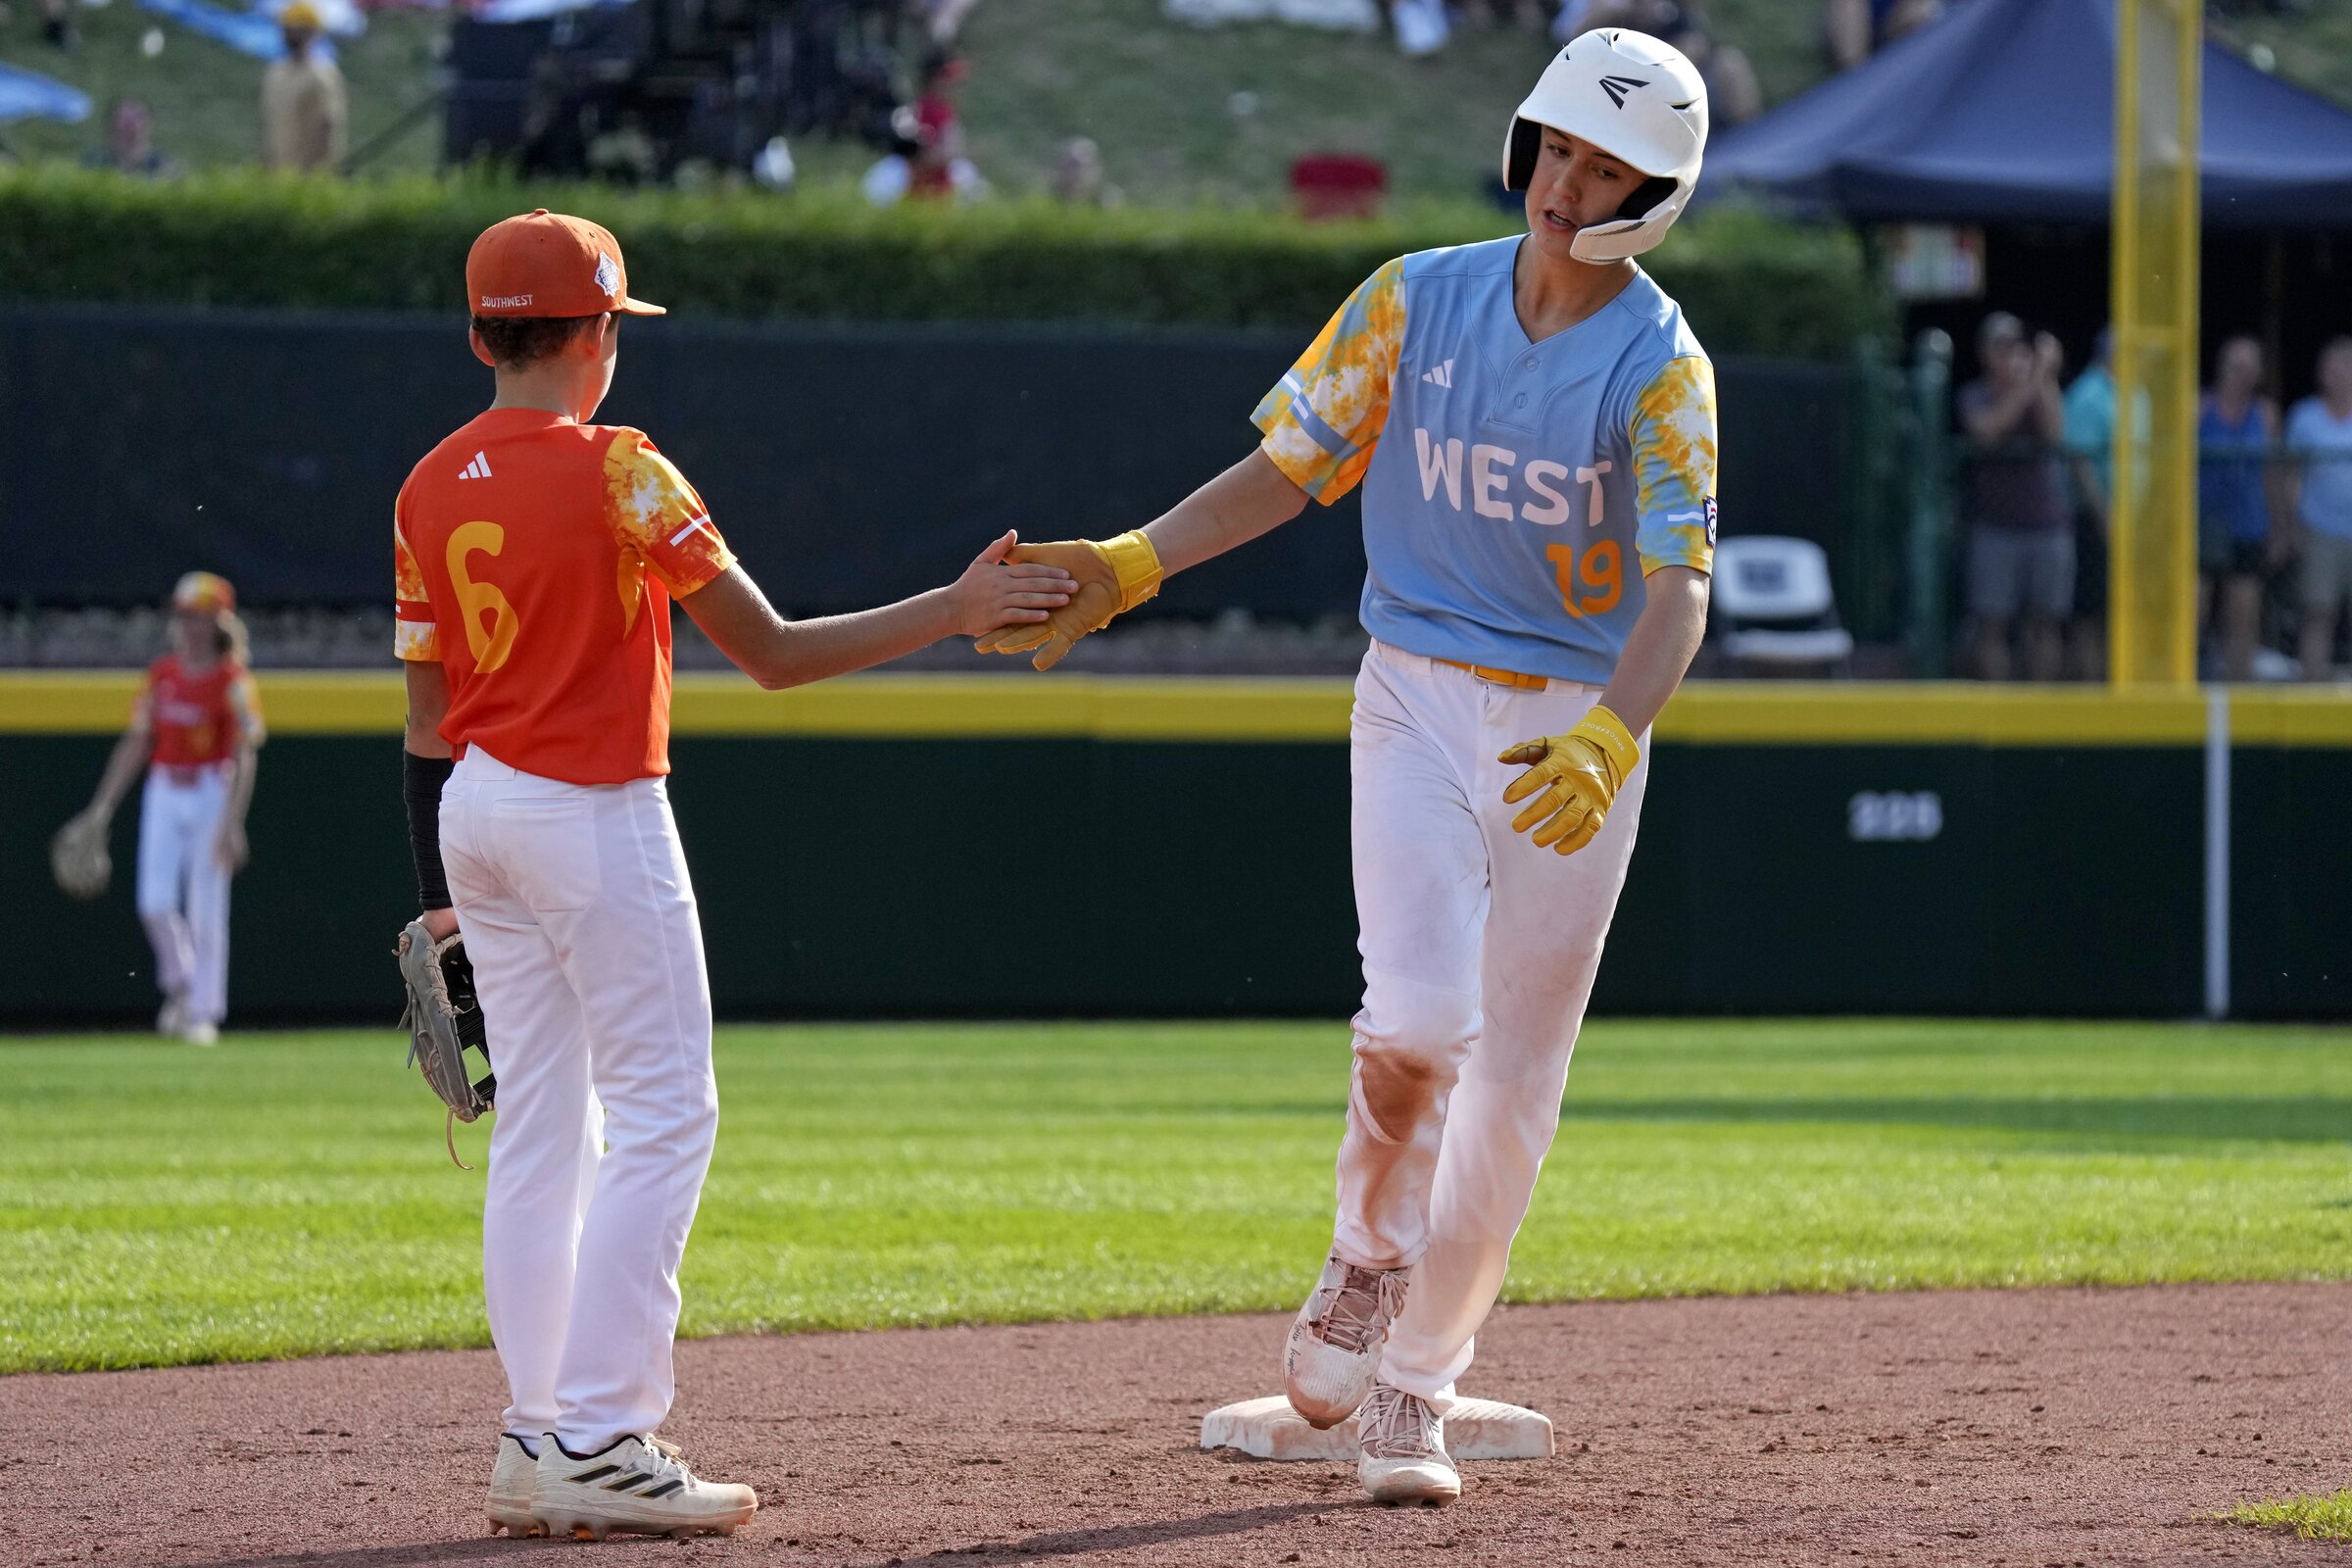 Youth baseball teams advance to national regional round